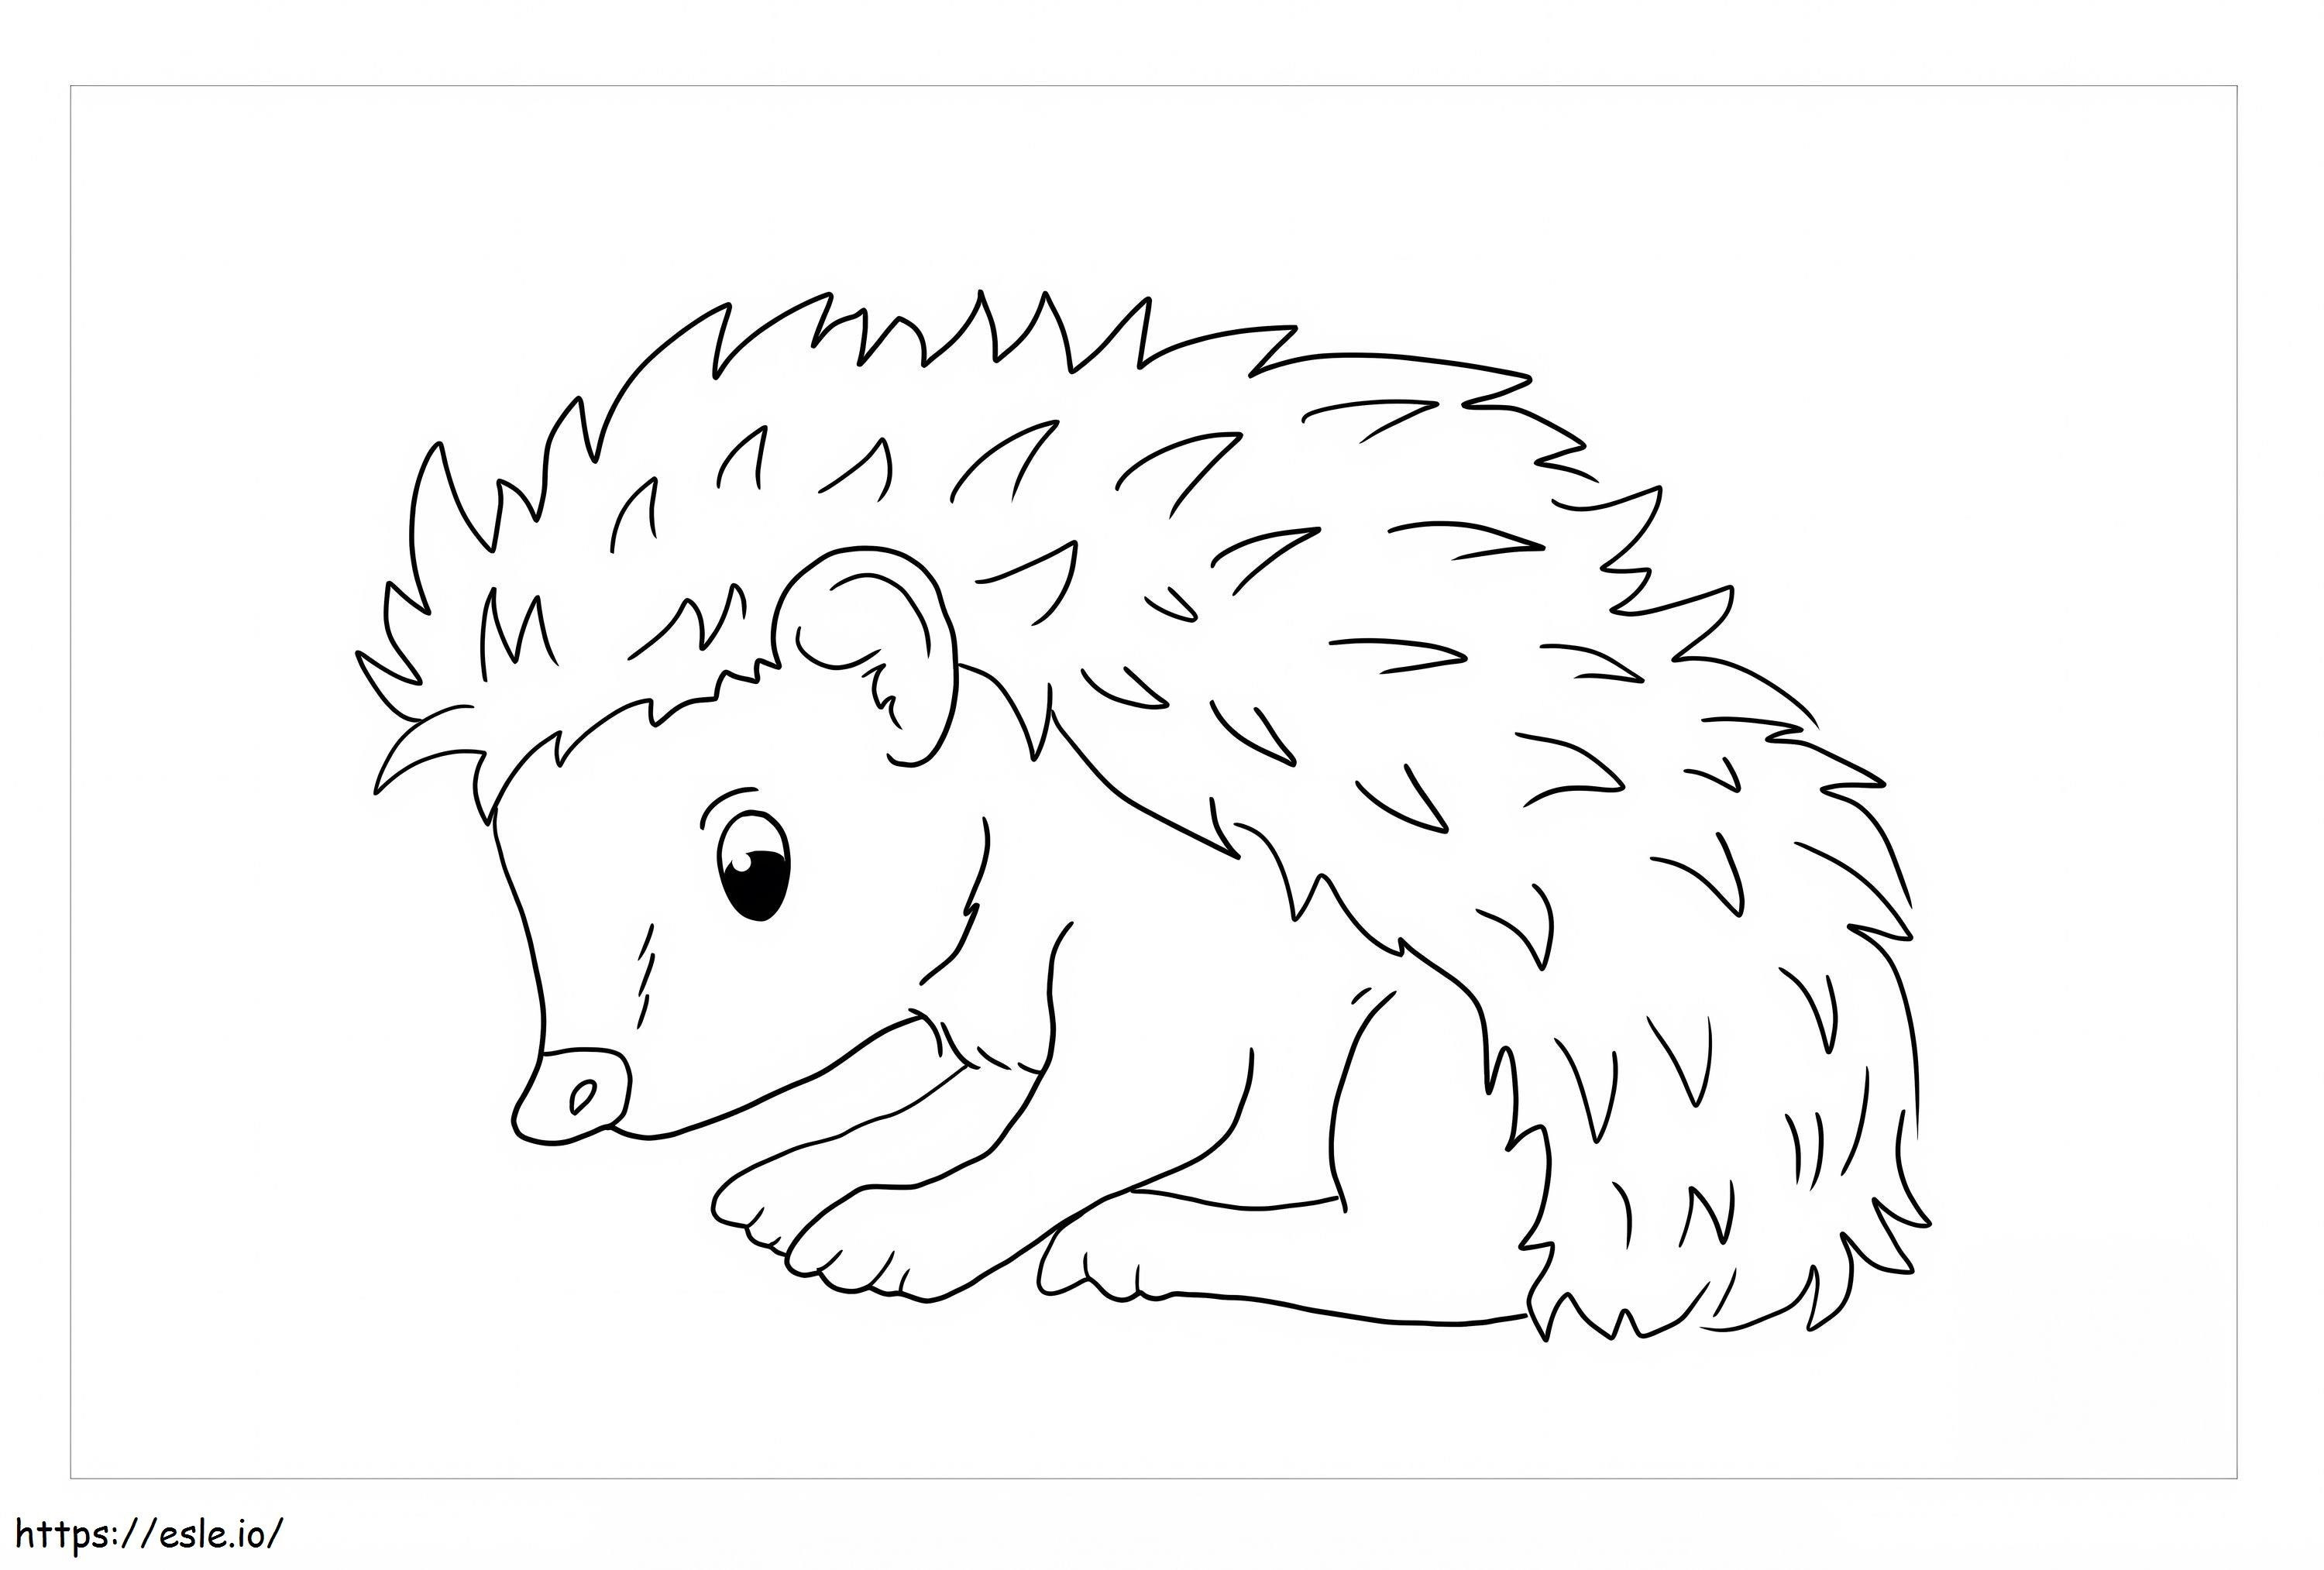 Perfect Hedgehog coloring page